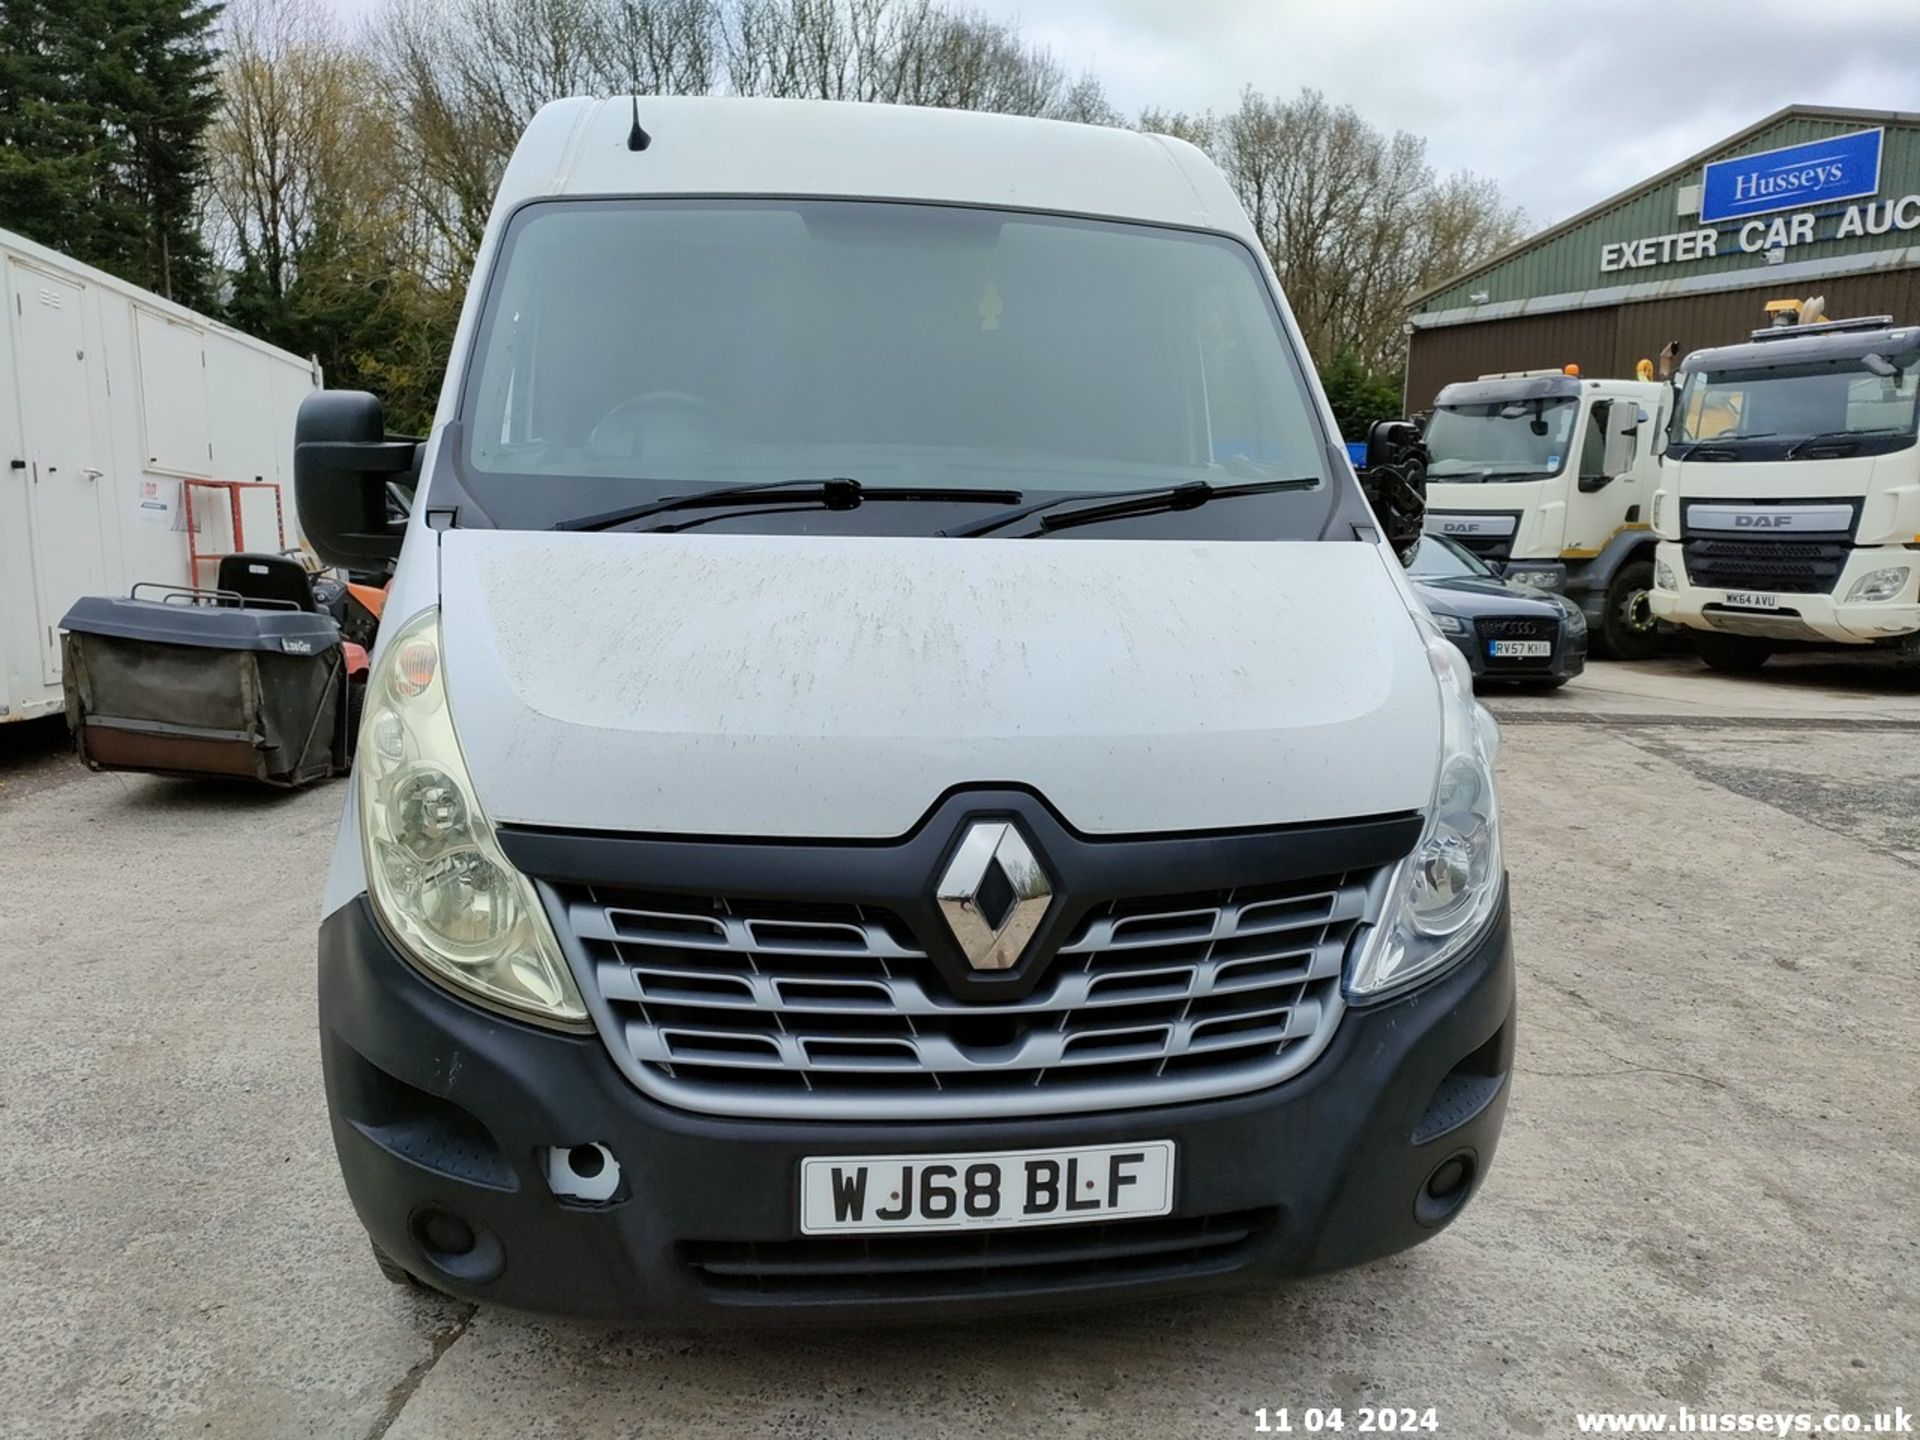 18/68 RENAULT MASTER LM35 BUSINESS DCI - 2298cc 5dr Van (White) - Image 8 of 68